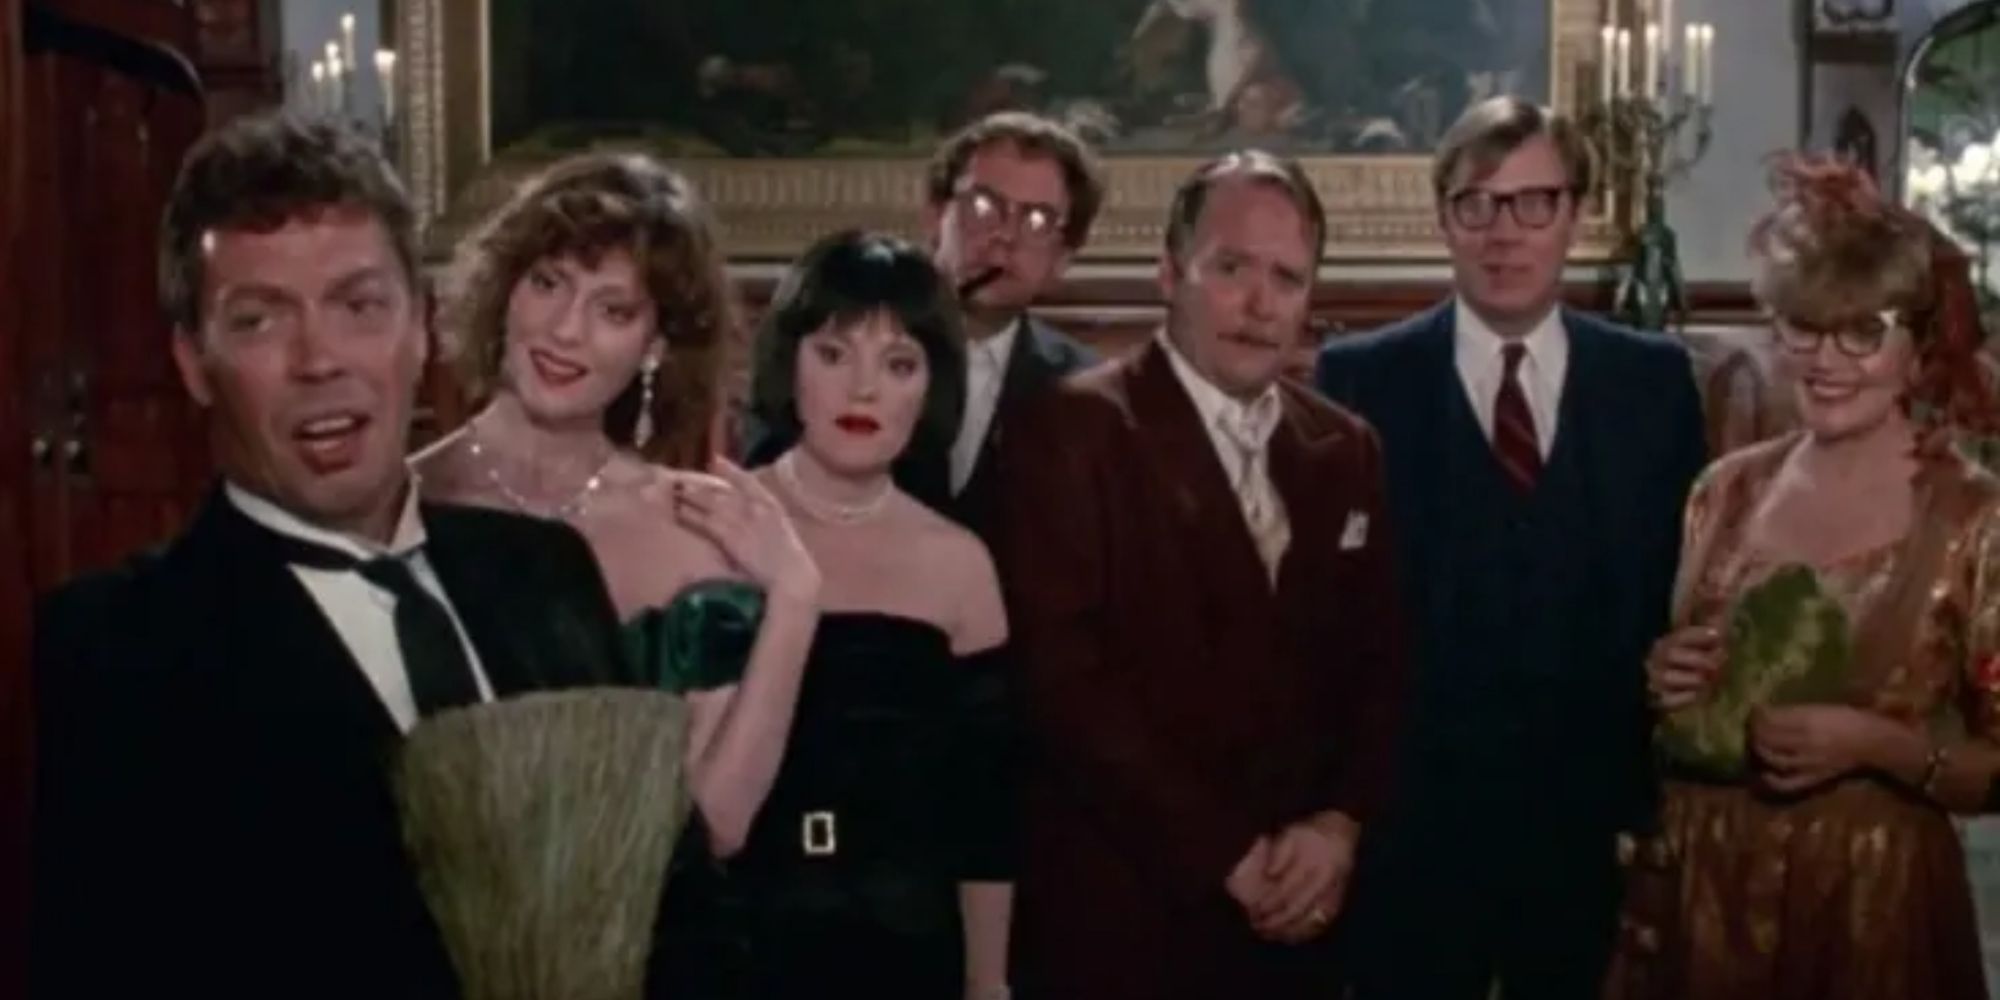 The cast of 'Clue' all looking off to the side 